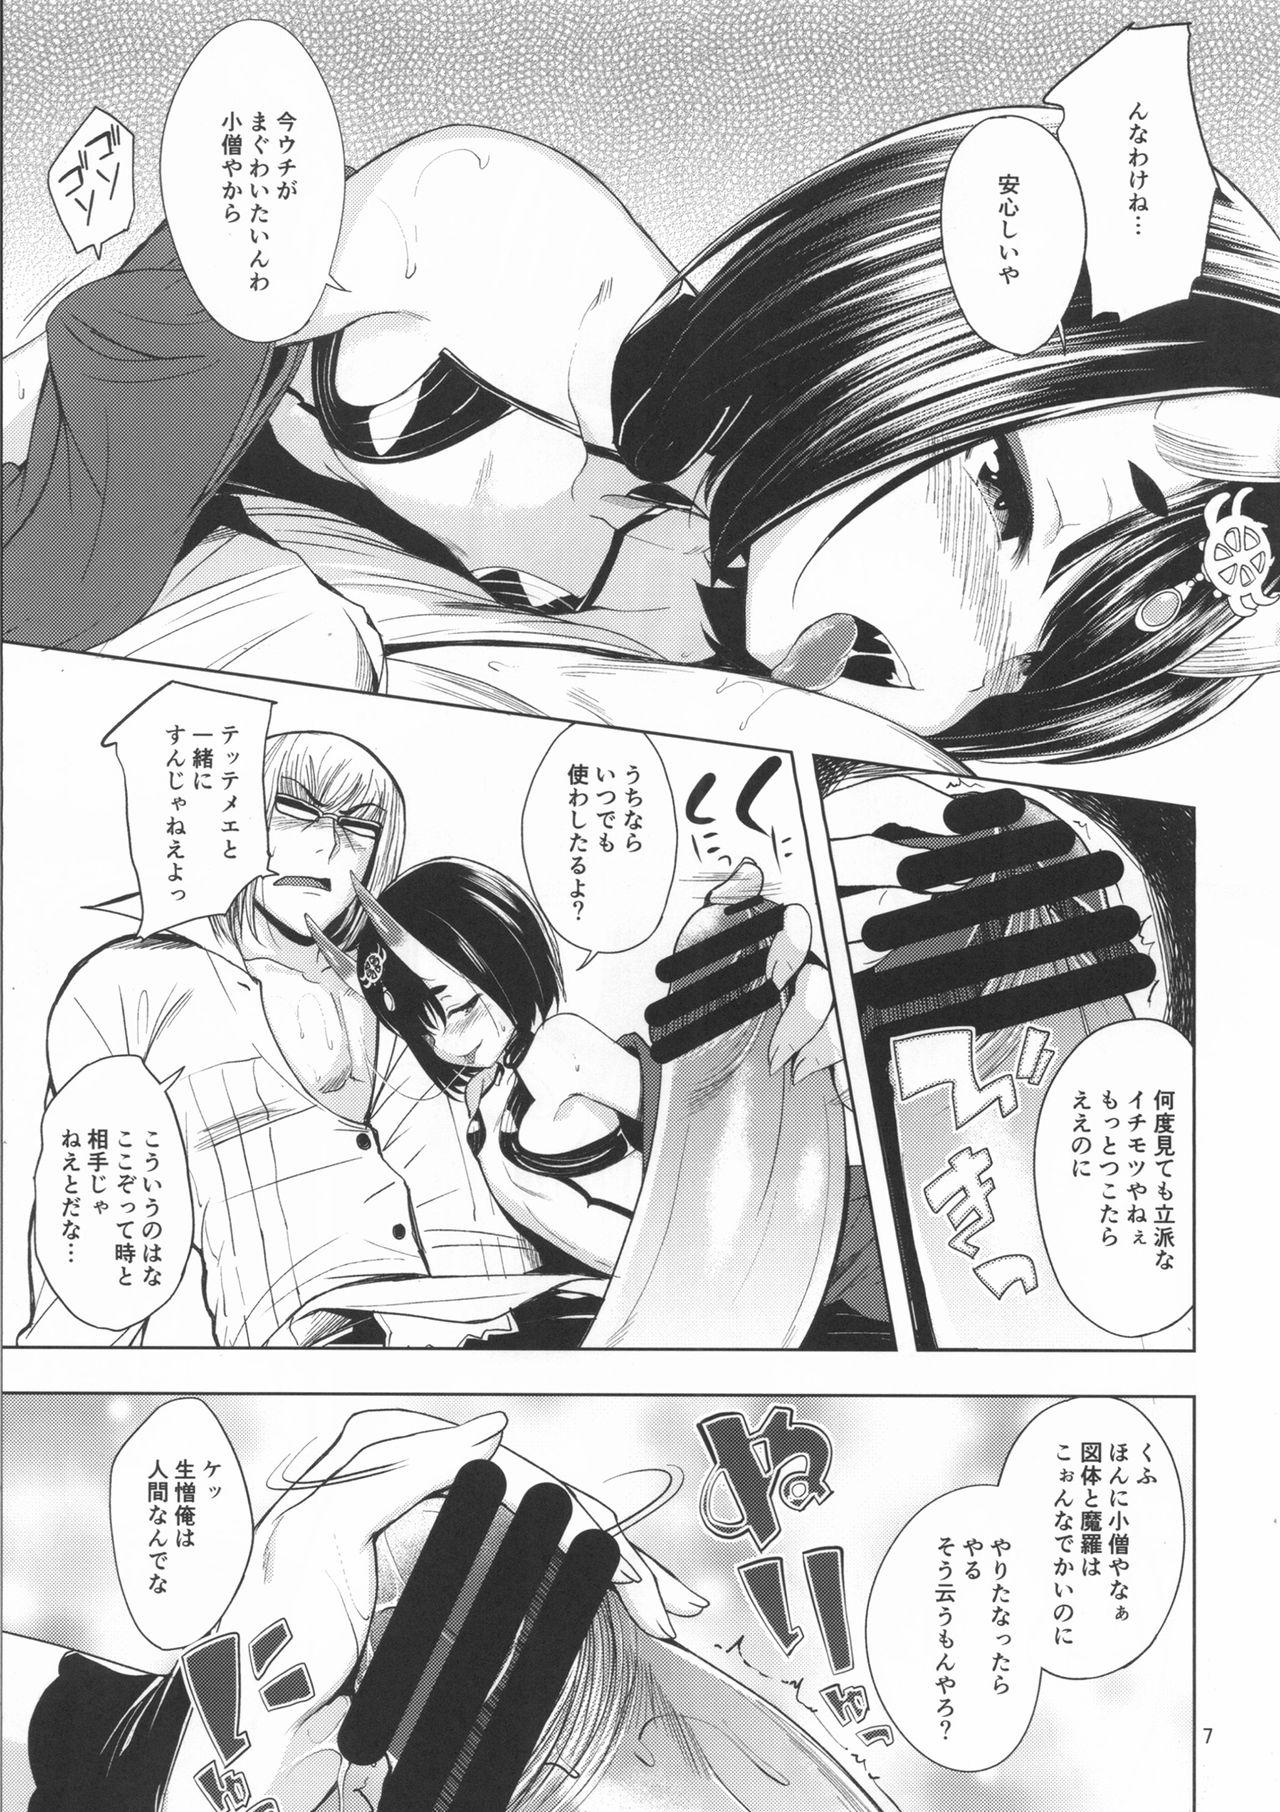 Tamil Kin no Sake - Fate grand order Little - Page 8